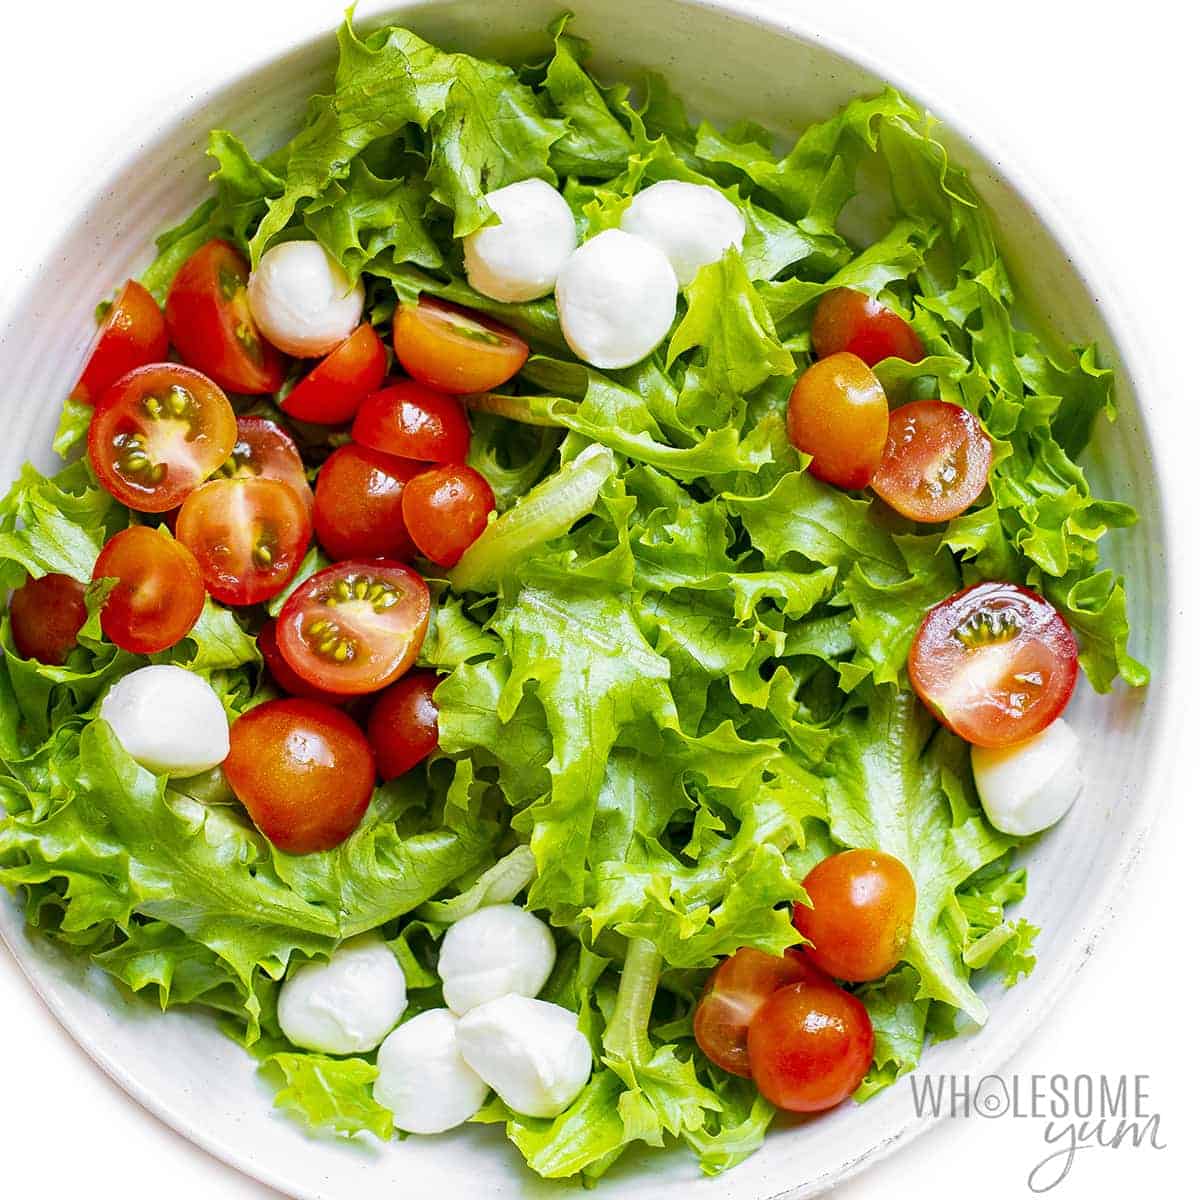 Salad ingredients without chicken in a bowl.